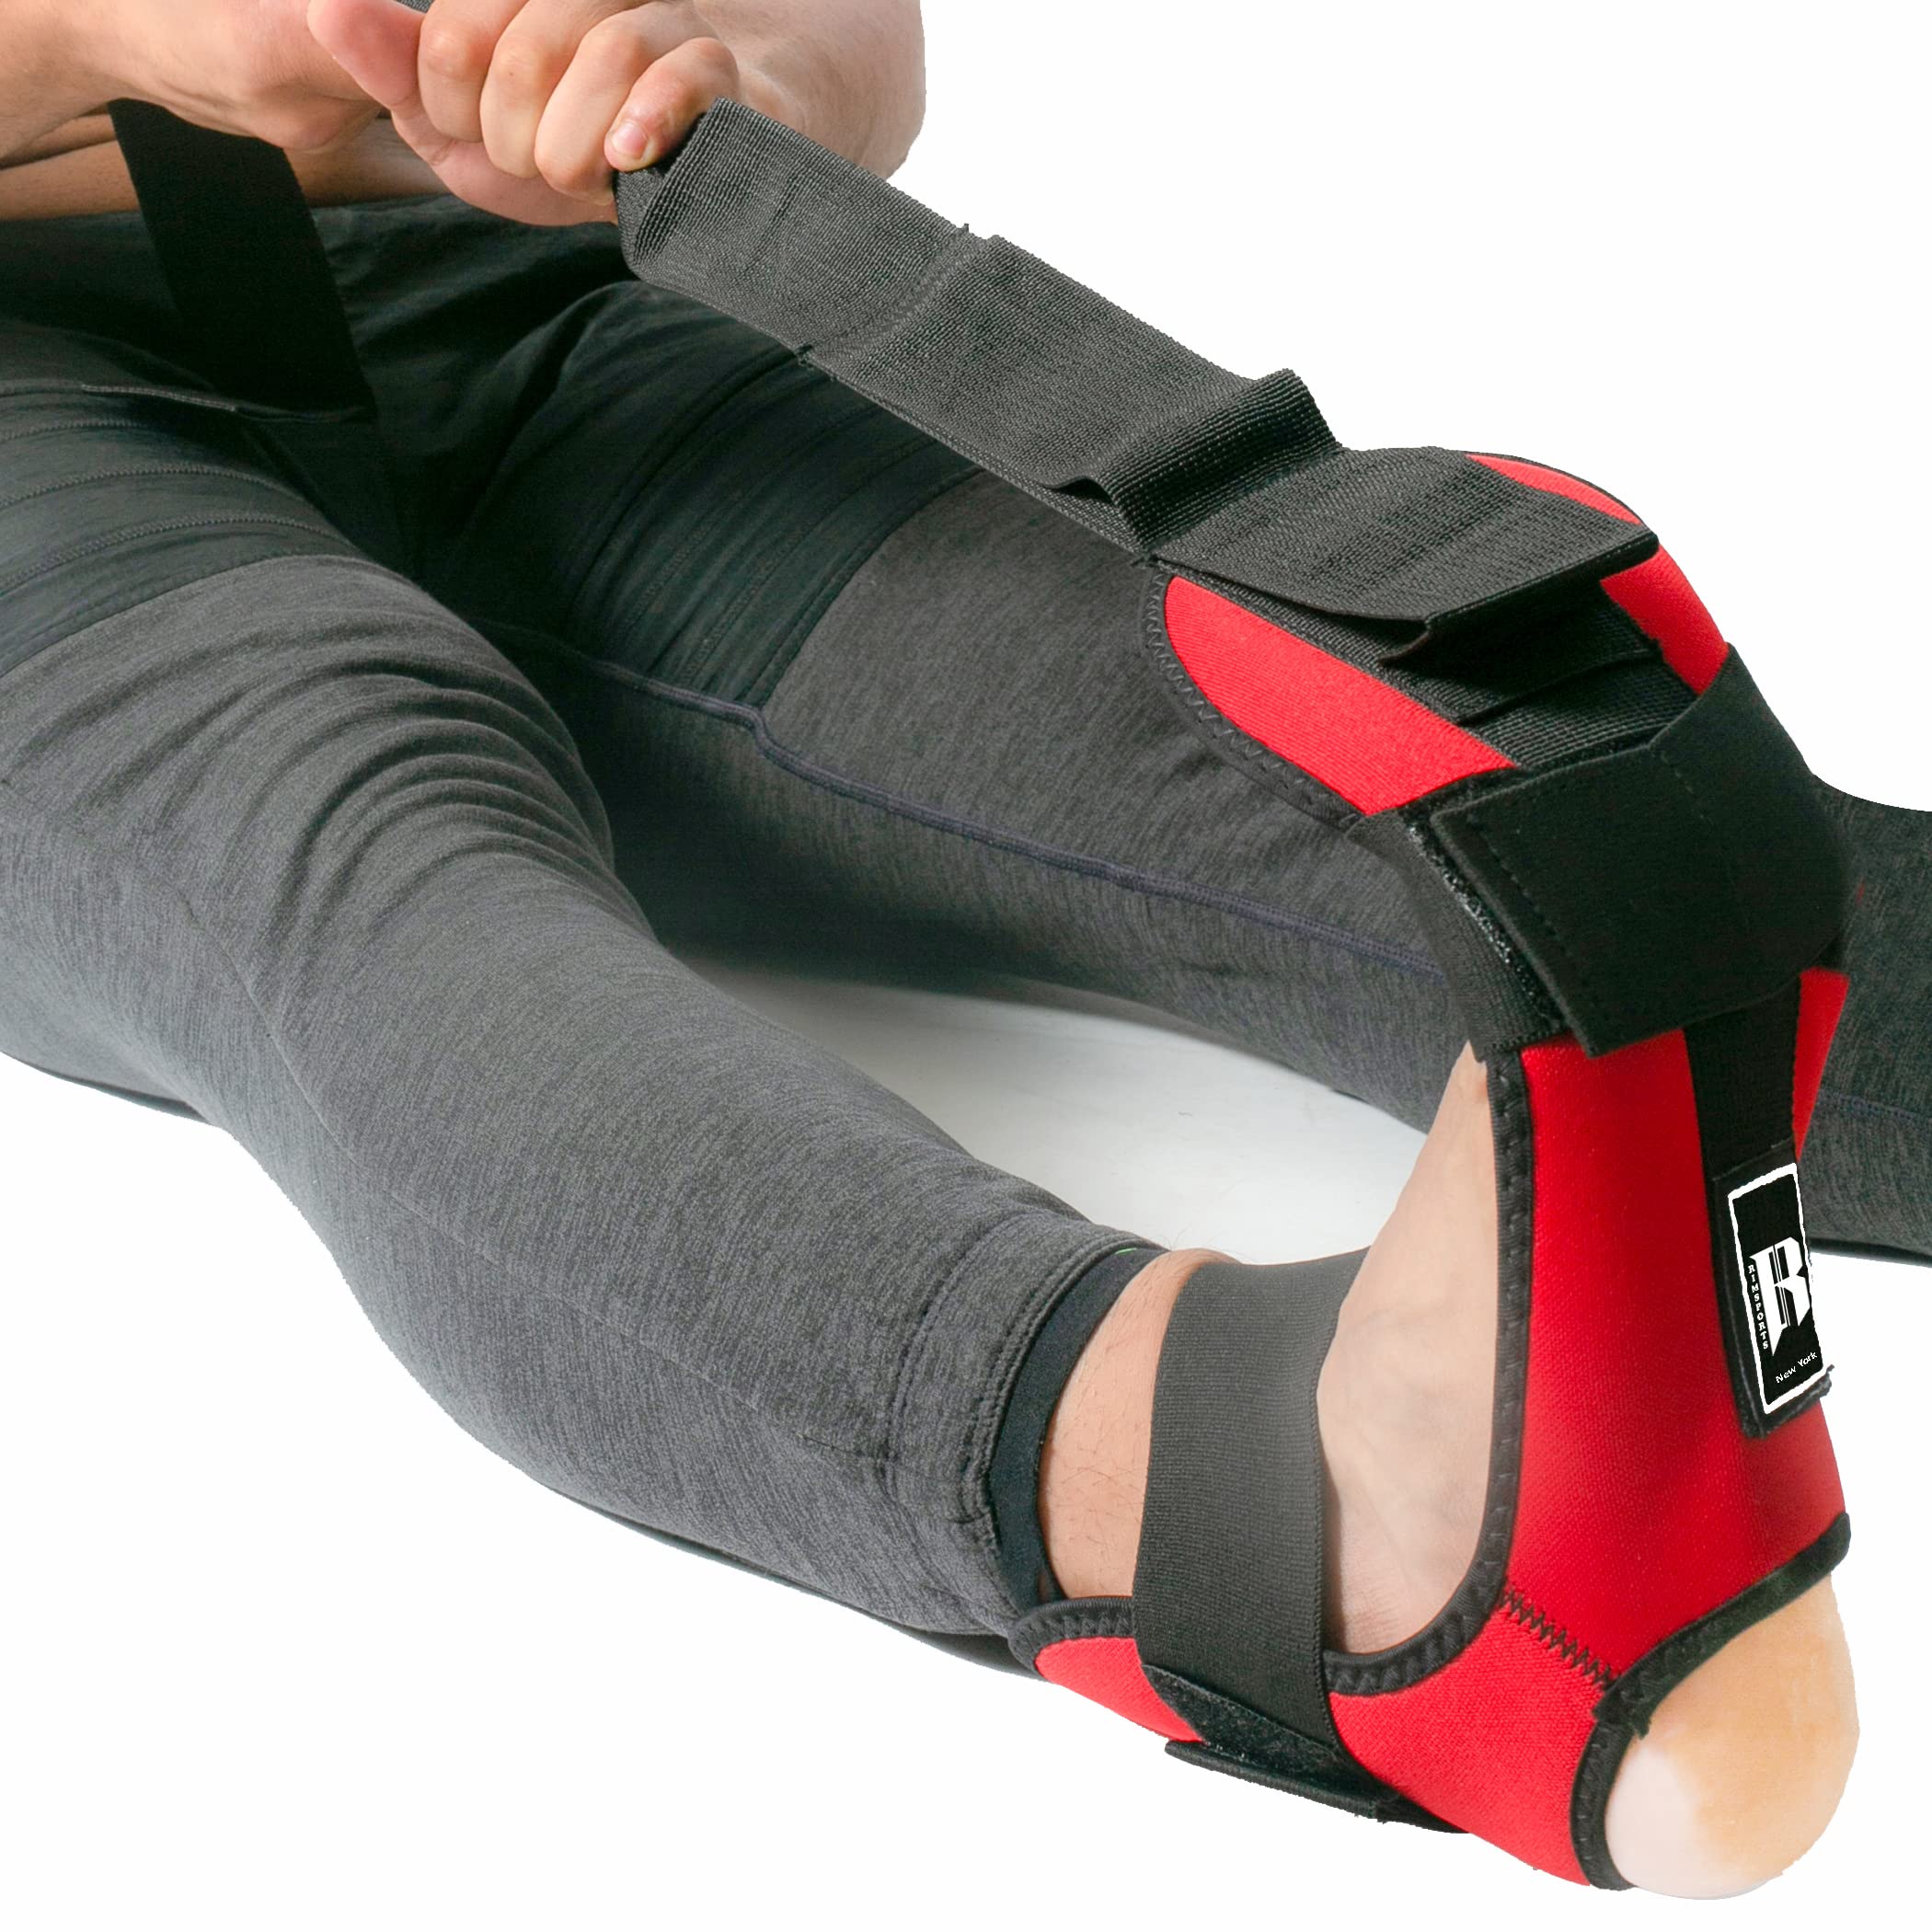 RIMSports Foot Stretcher and Calf Stretcher - Leg Stretcher Strap for  Plantar Fasciitis and Achilles Tendonitis, Foot